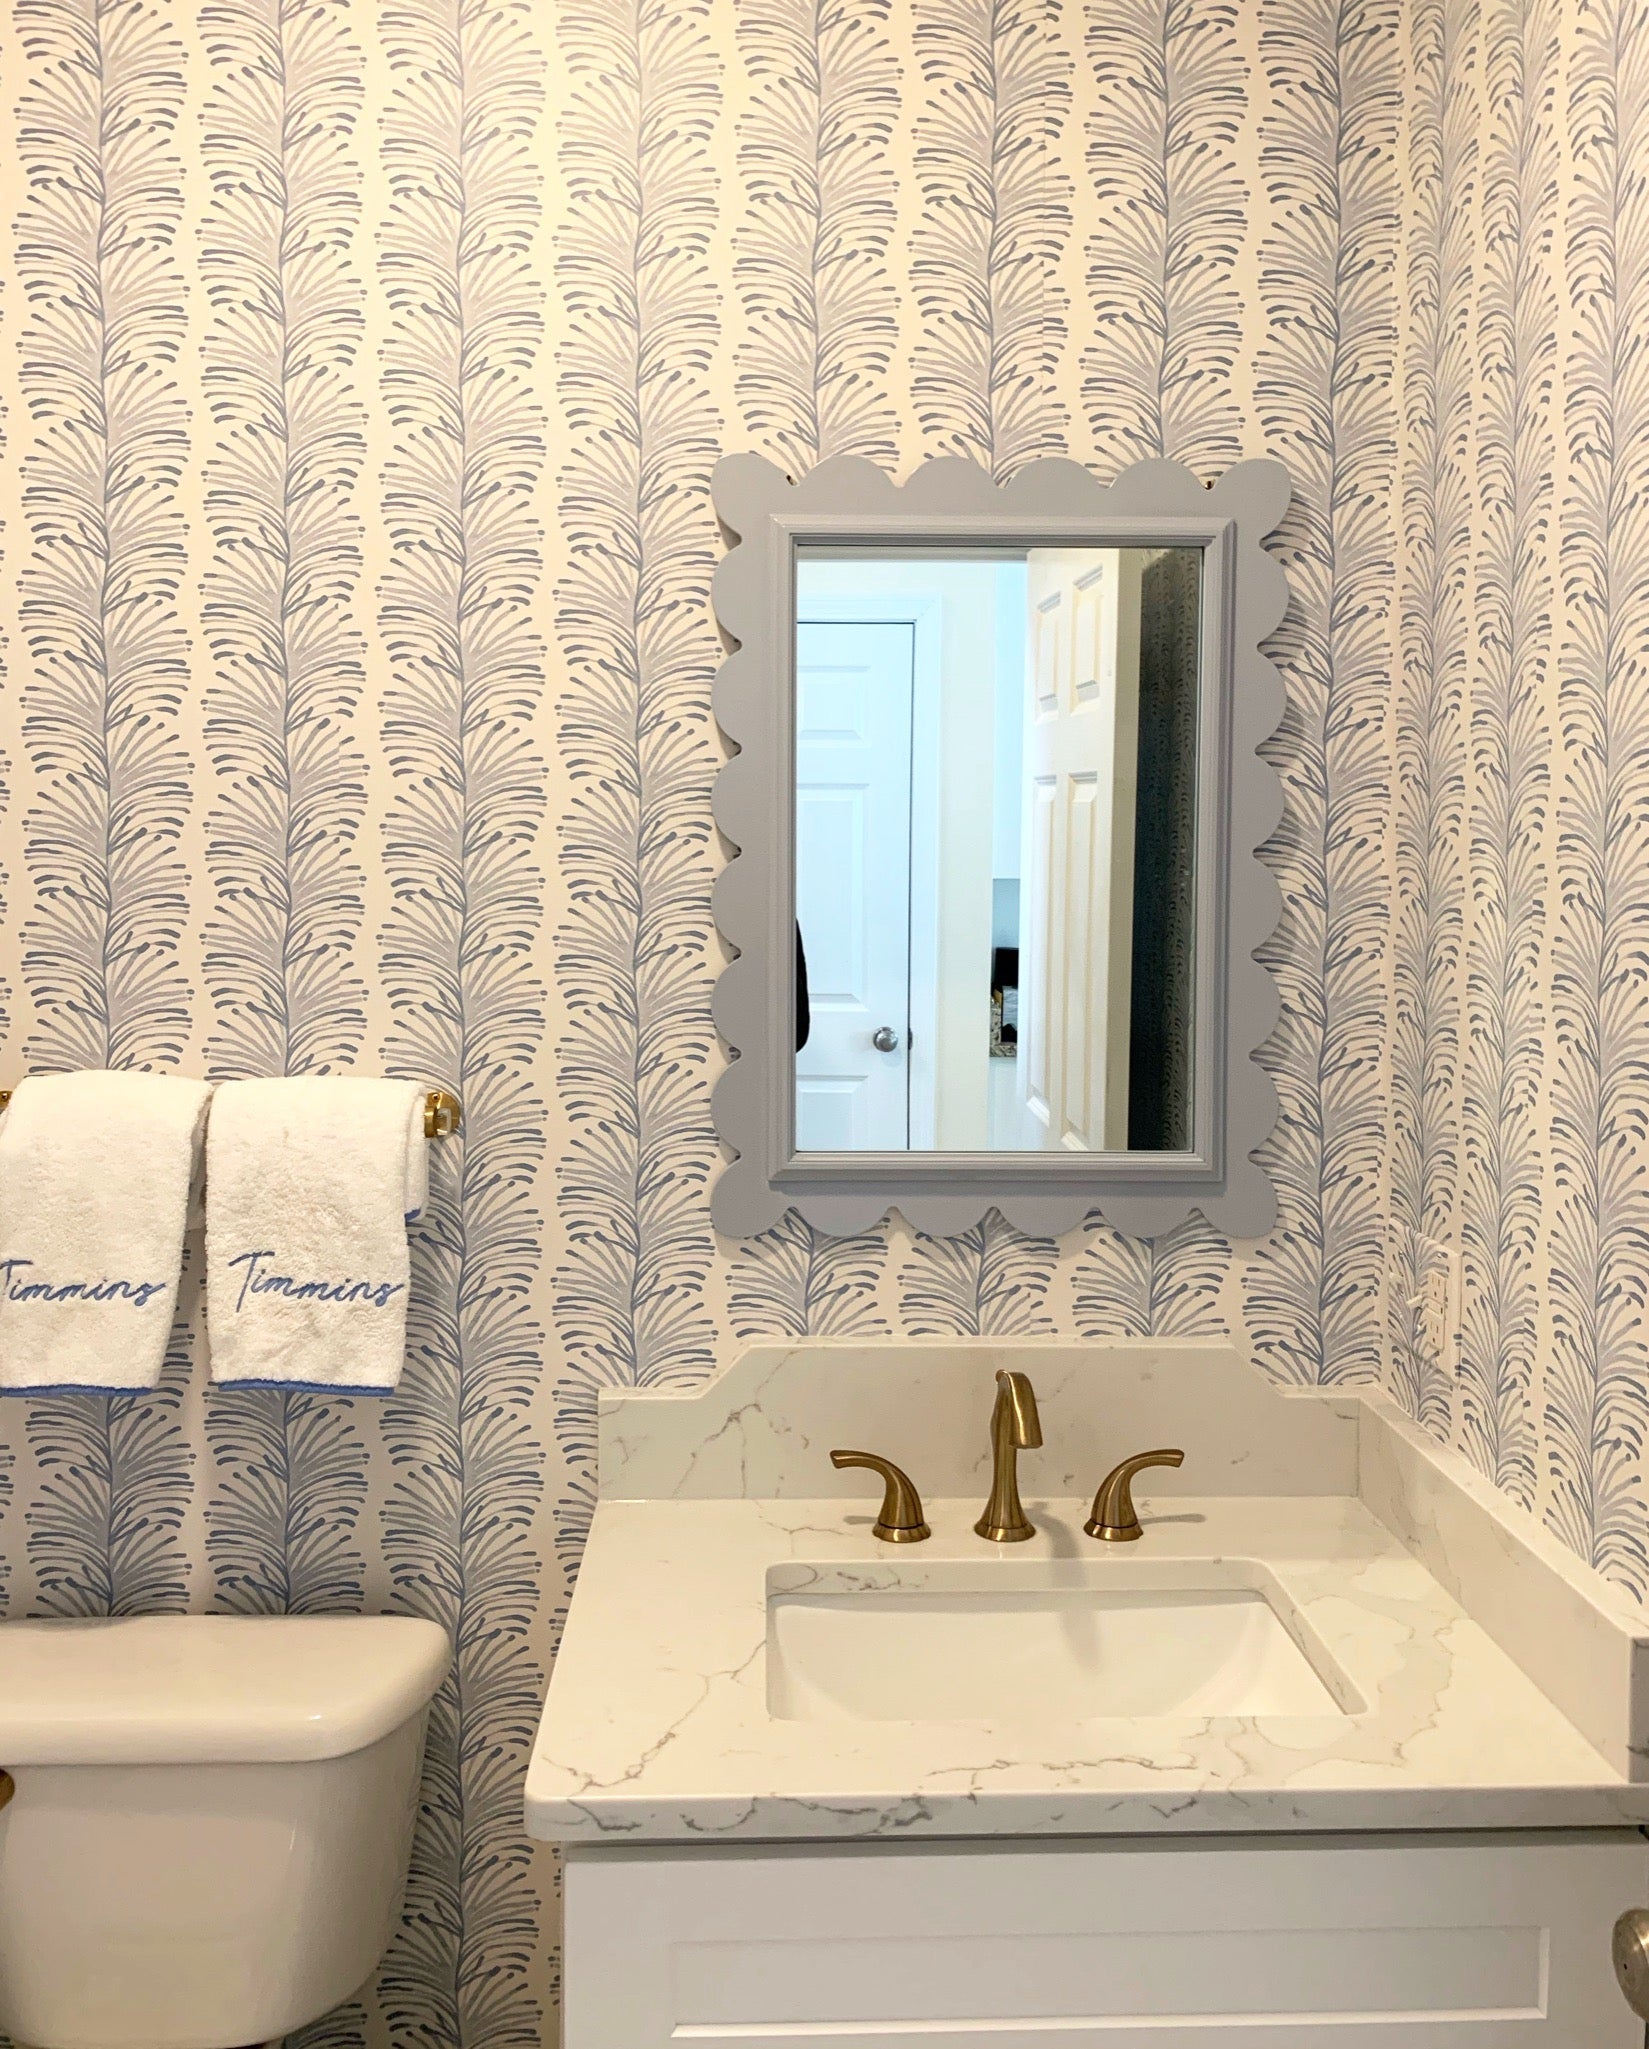 Bathroom with sky blue botanical wallpaper, white vanity and blue scalloped mirror